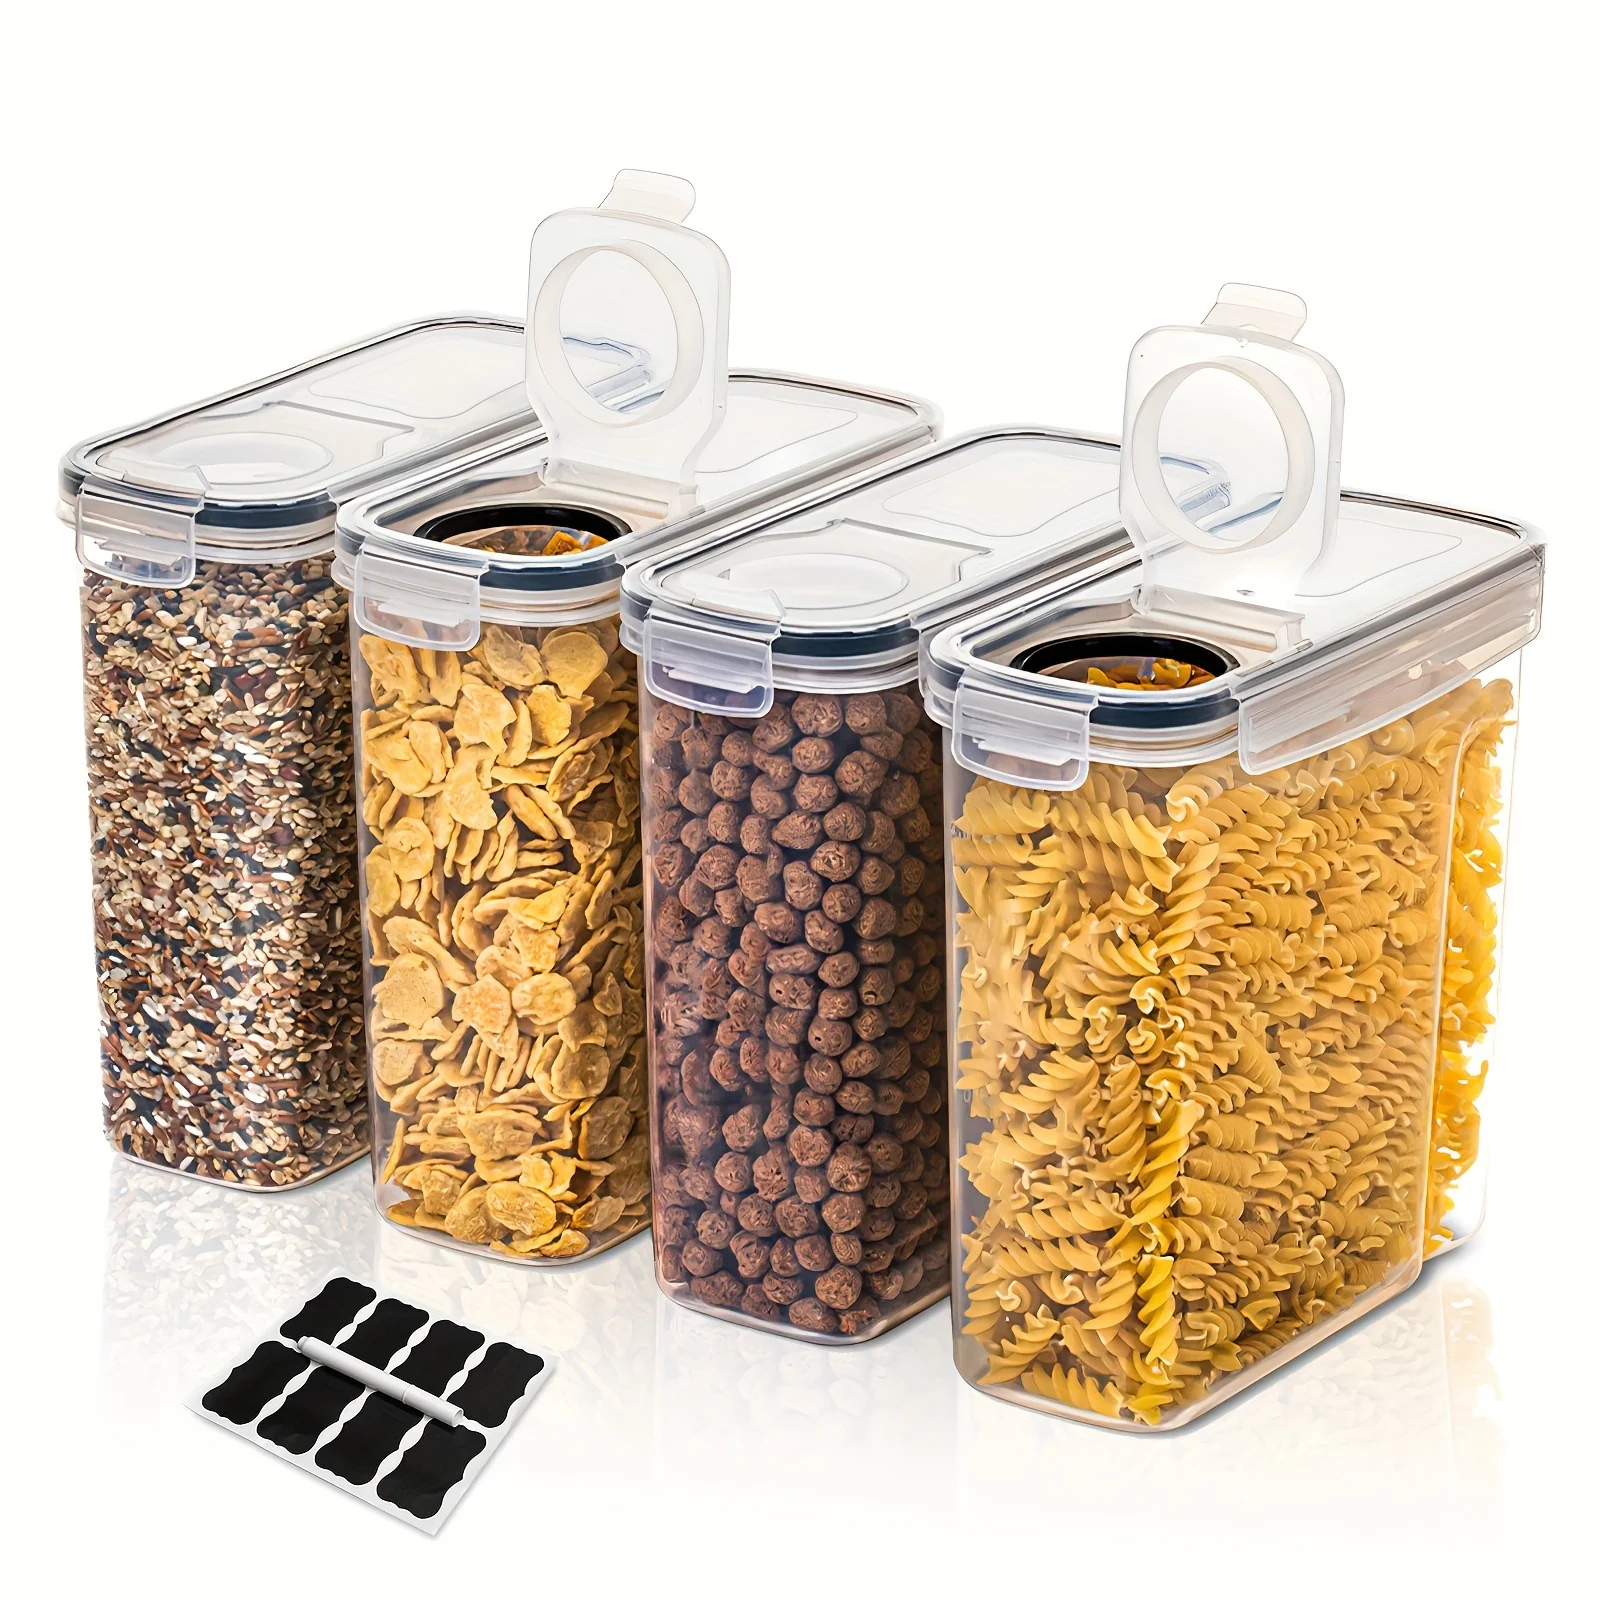 

2.5L/88 Oz Cereal Storage Container Set BPA Free Plastic Airtight Food Storage Containers 4 Piece Set Cereal Dispensers kitchen